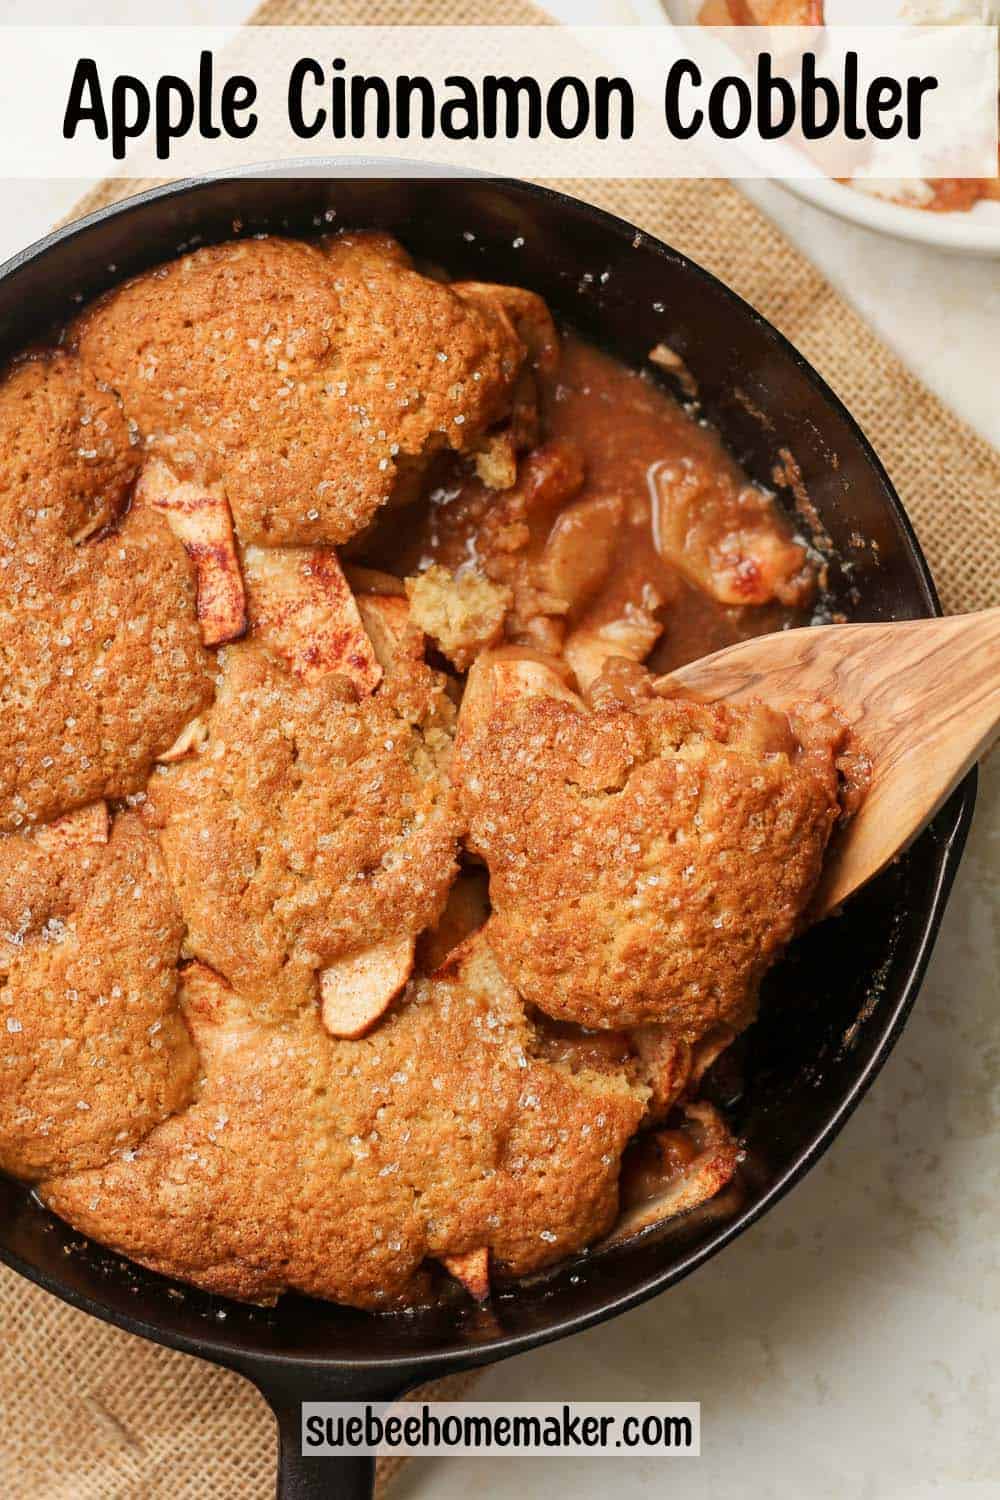 A skillet of apple cobbler with a spoon lifting some out.